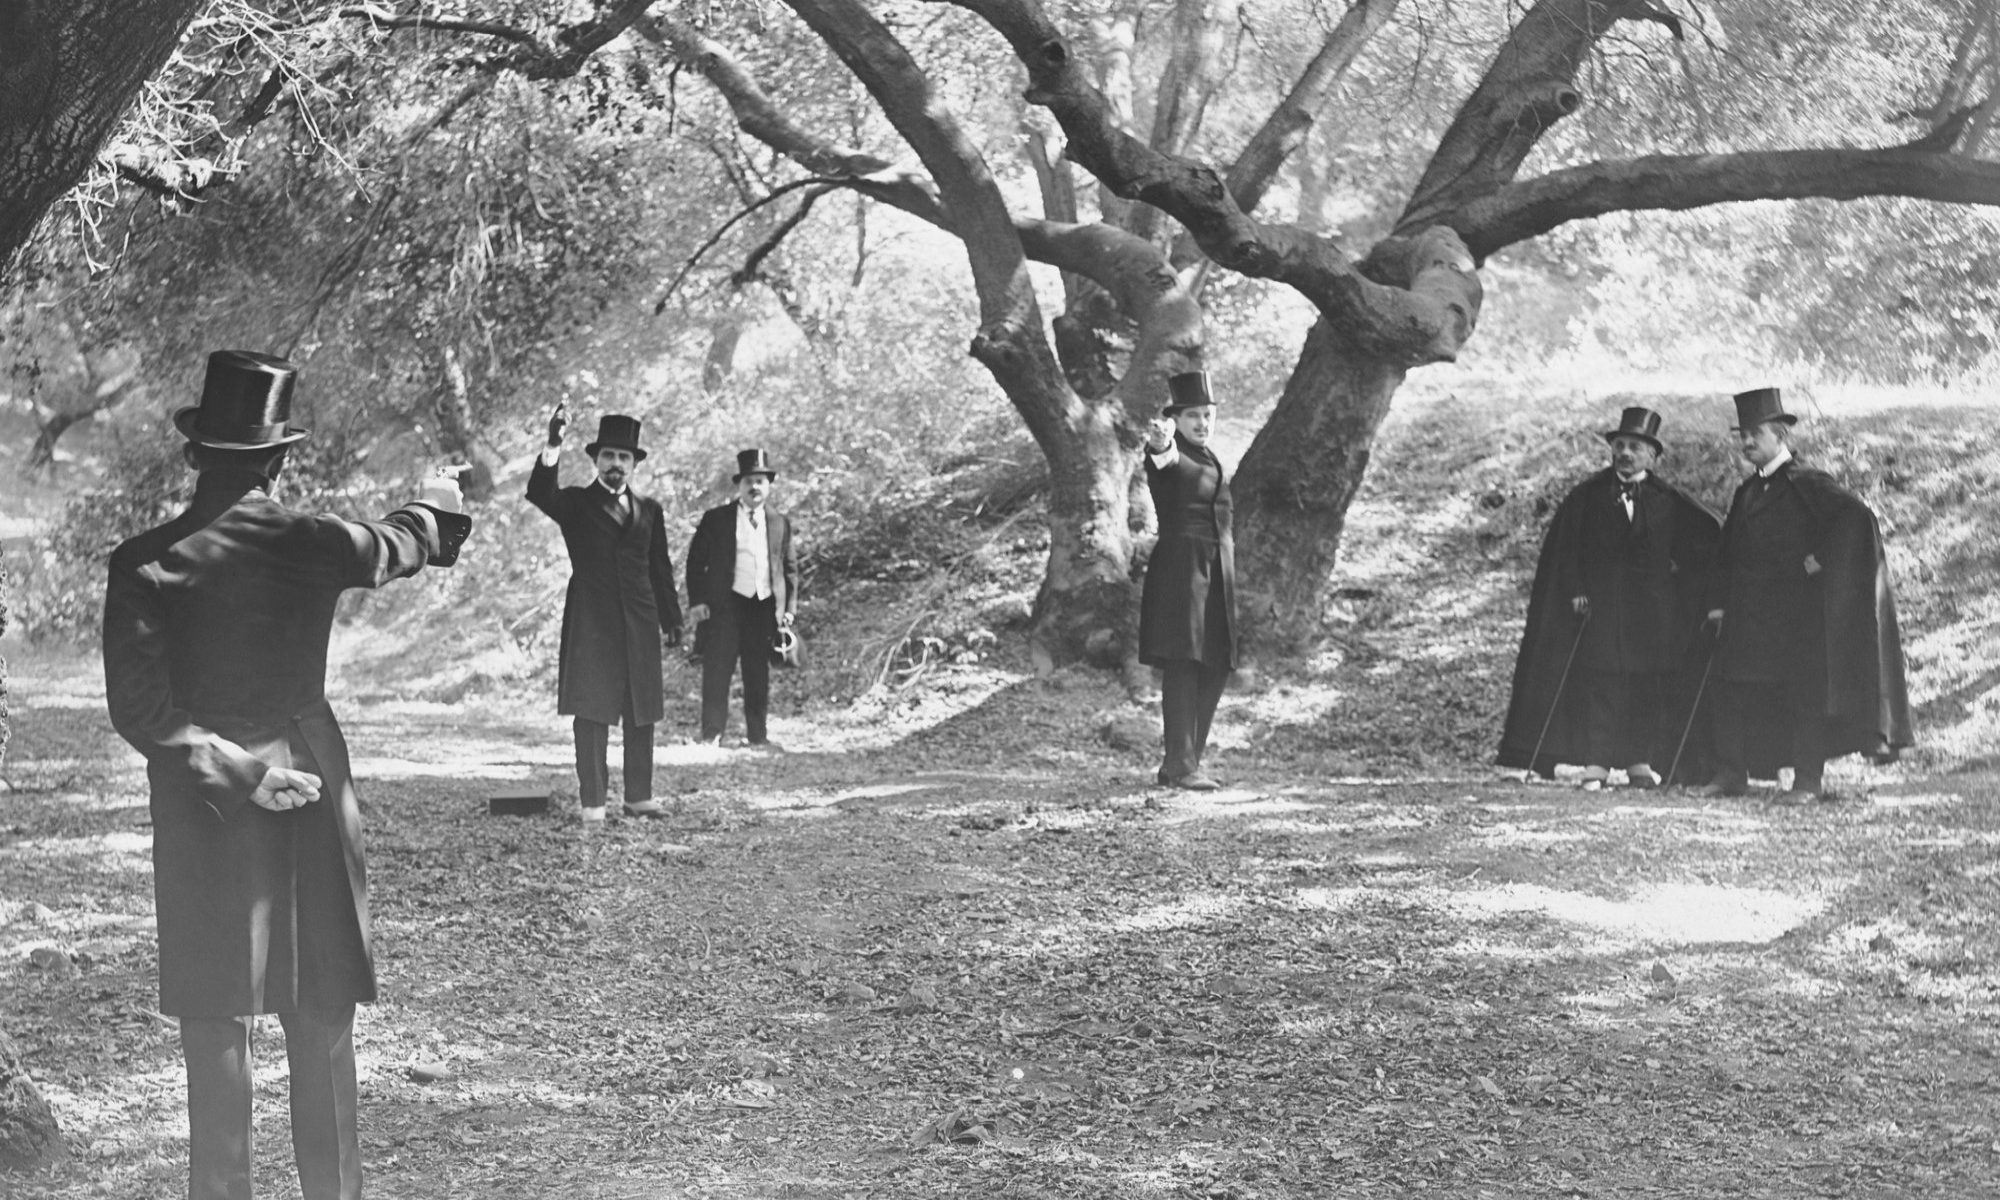 black-and-white photograph of gentlemen engaged in gun duel